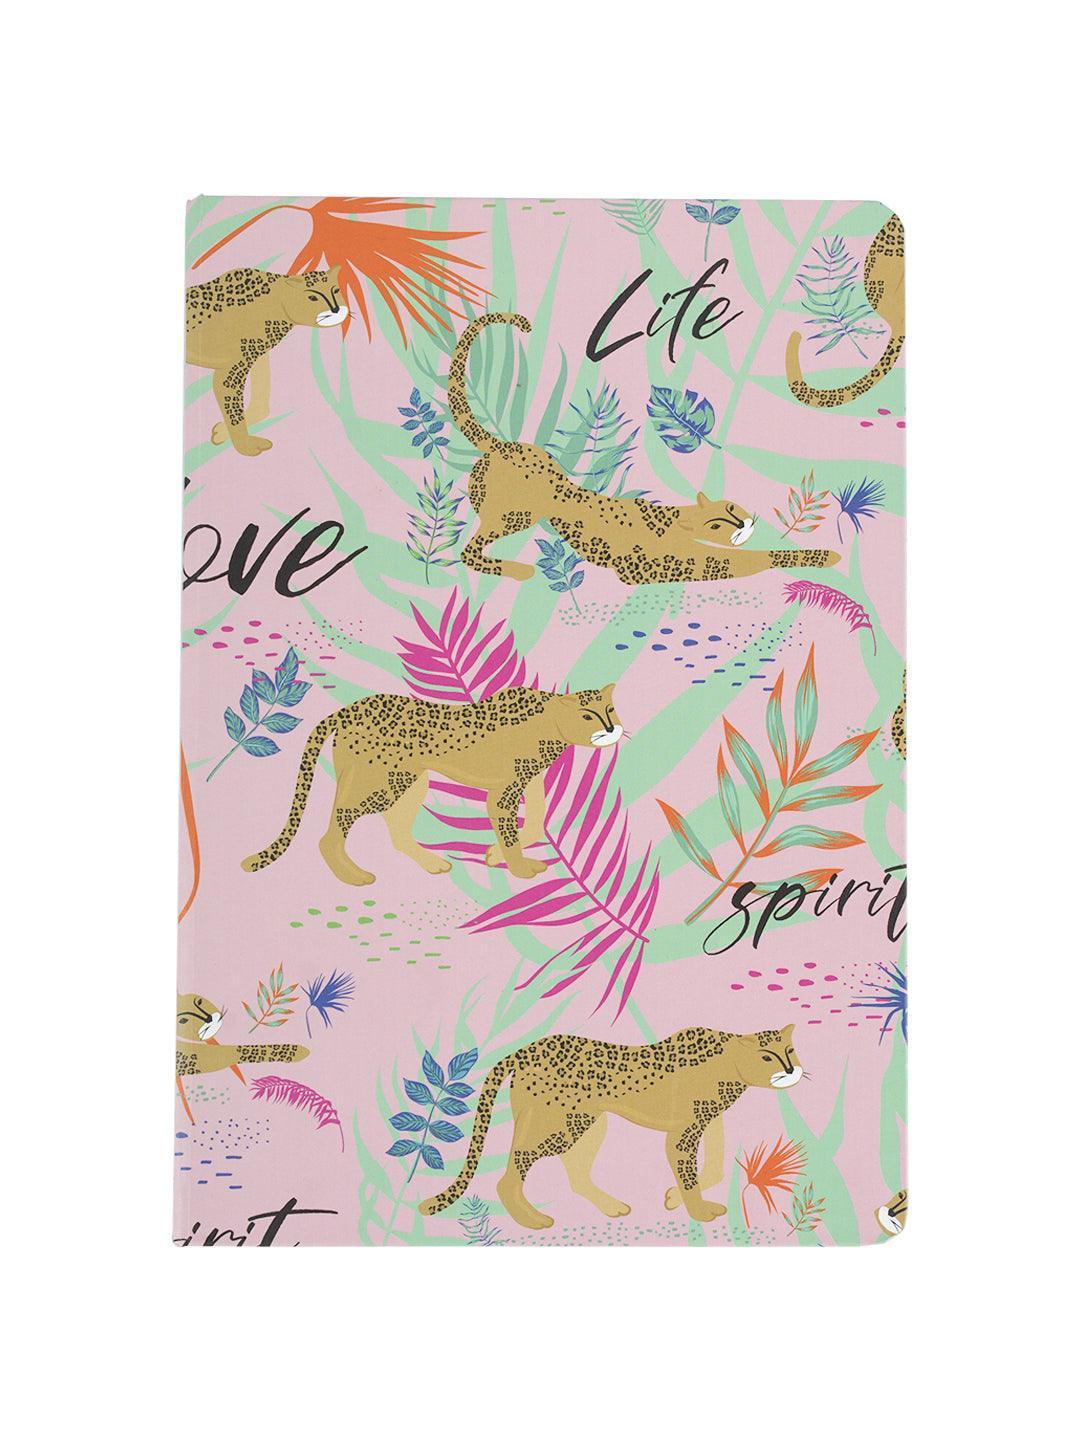 Market99 Leopard & Zebra Animal Print Composition A5 Note Book, Blank Lined Diary - MARKET 99